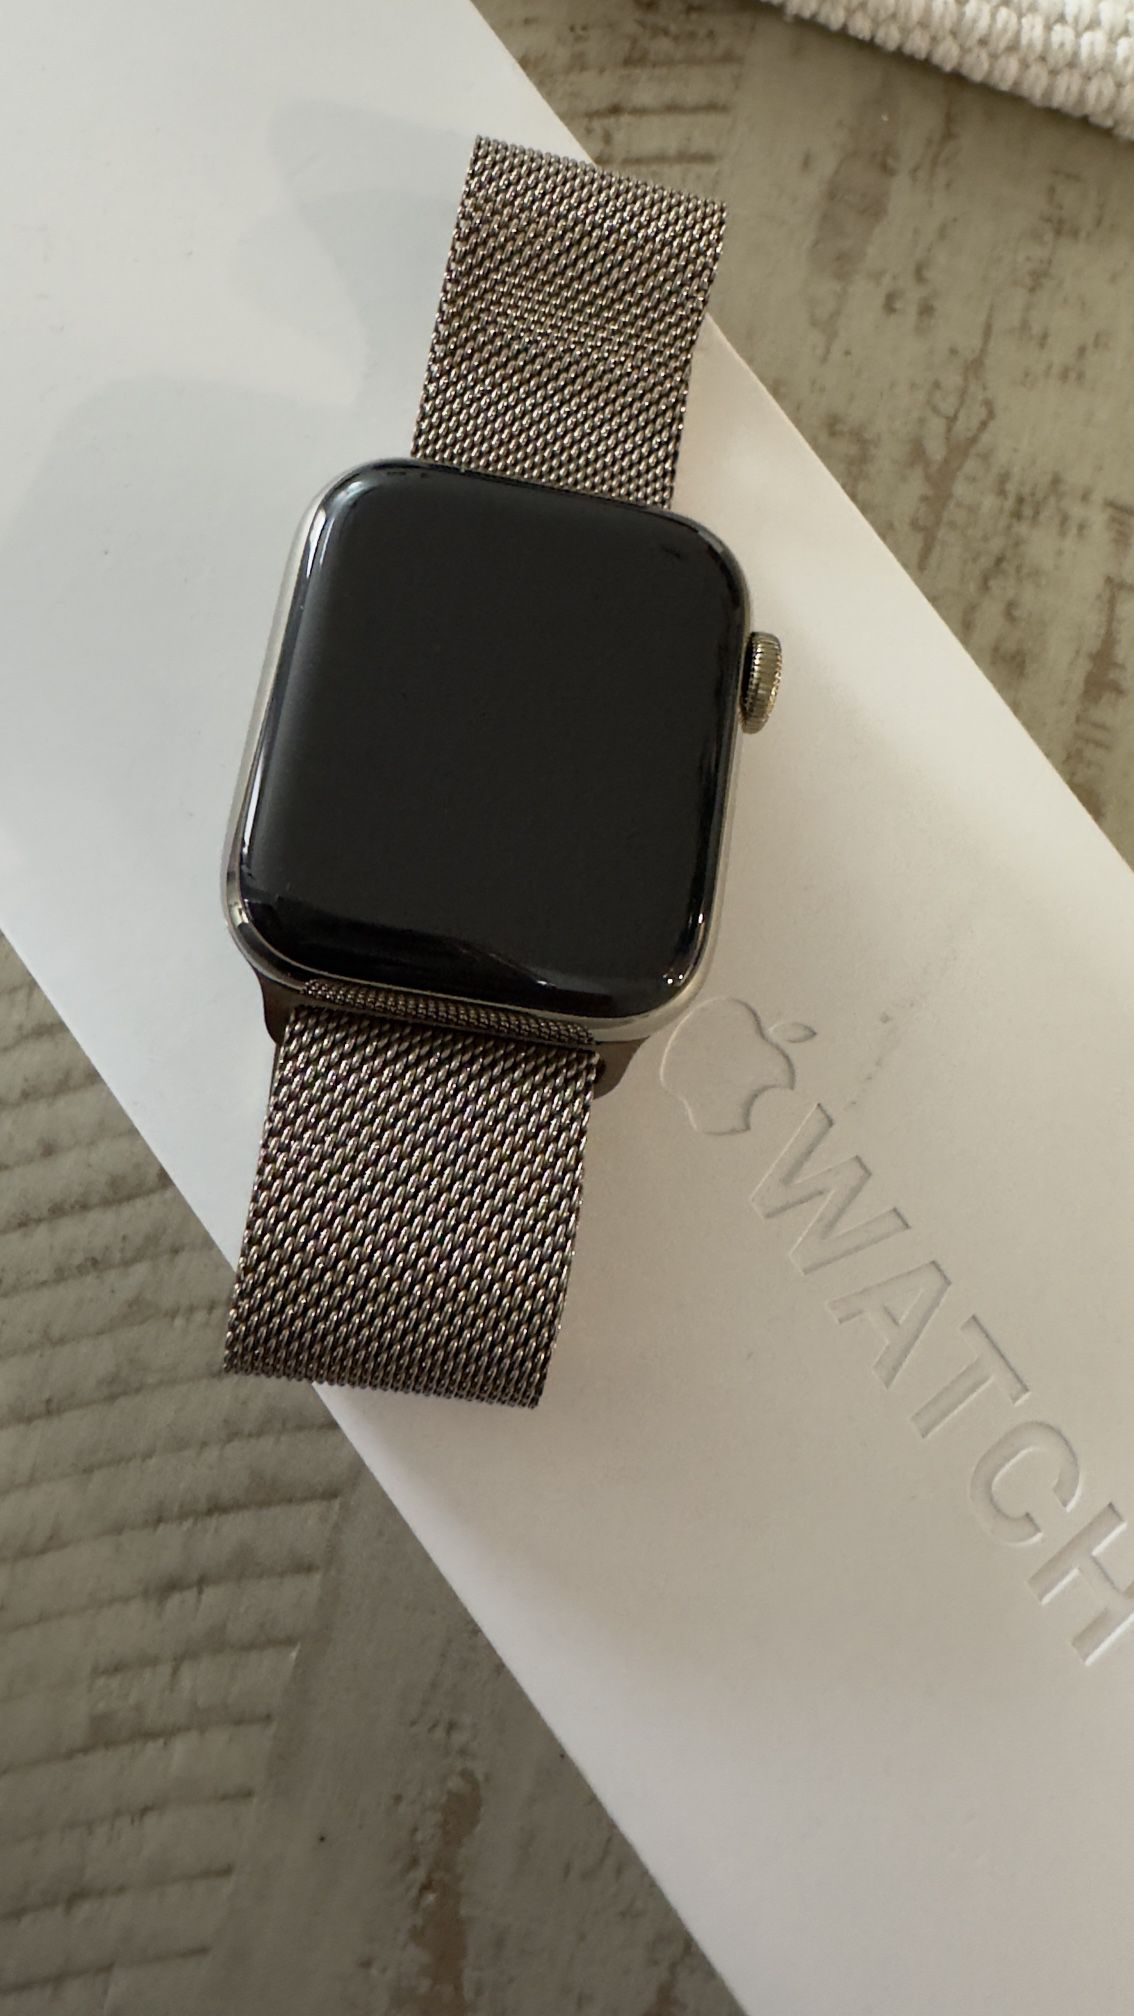 Apple Watch Gold Stainless Steel 40mm  $440